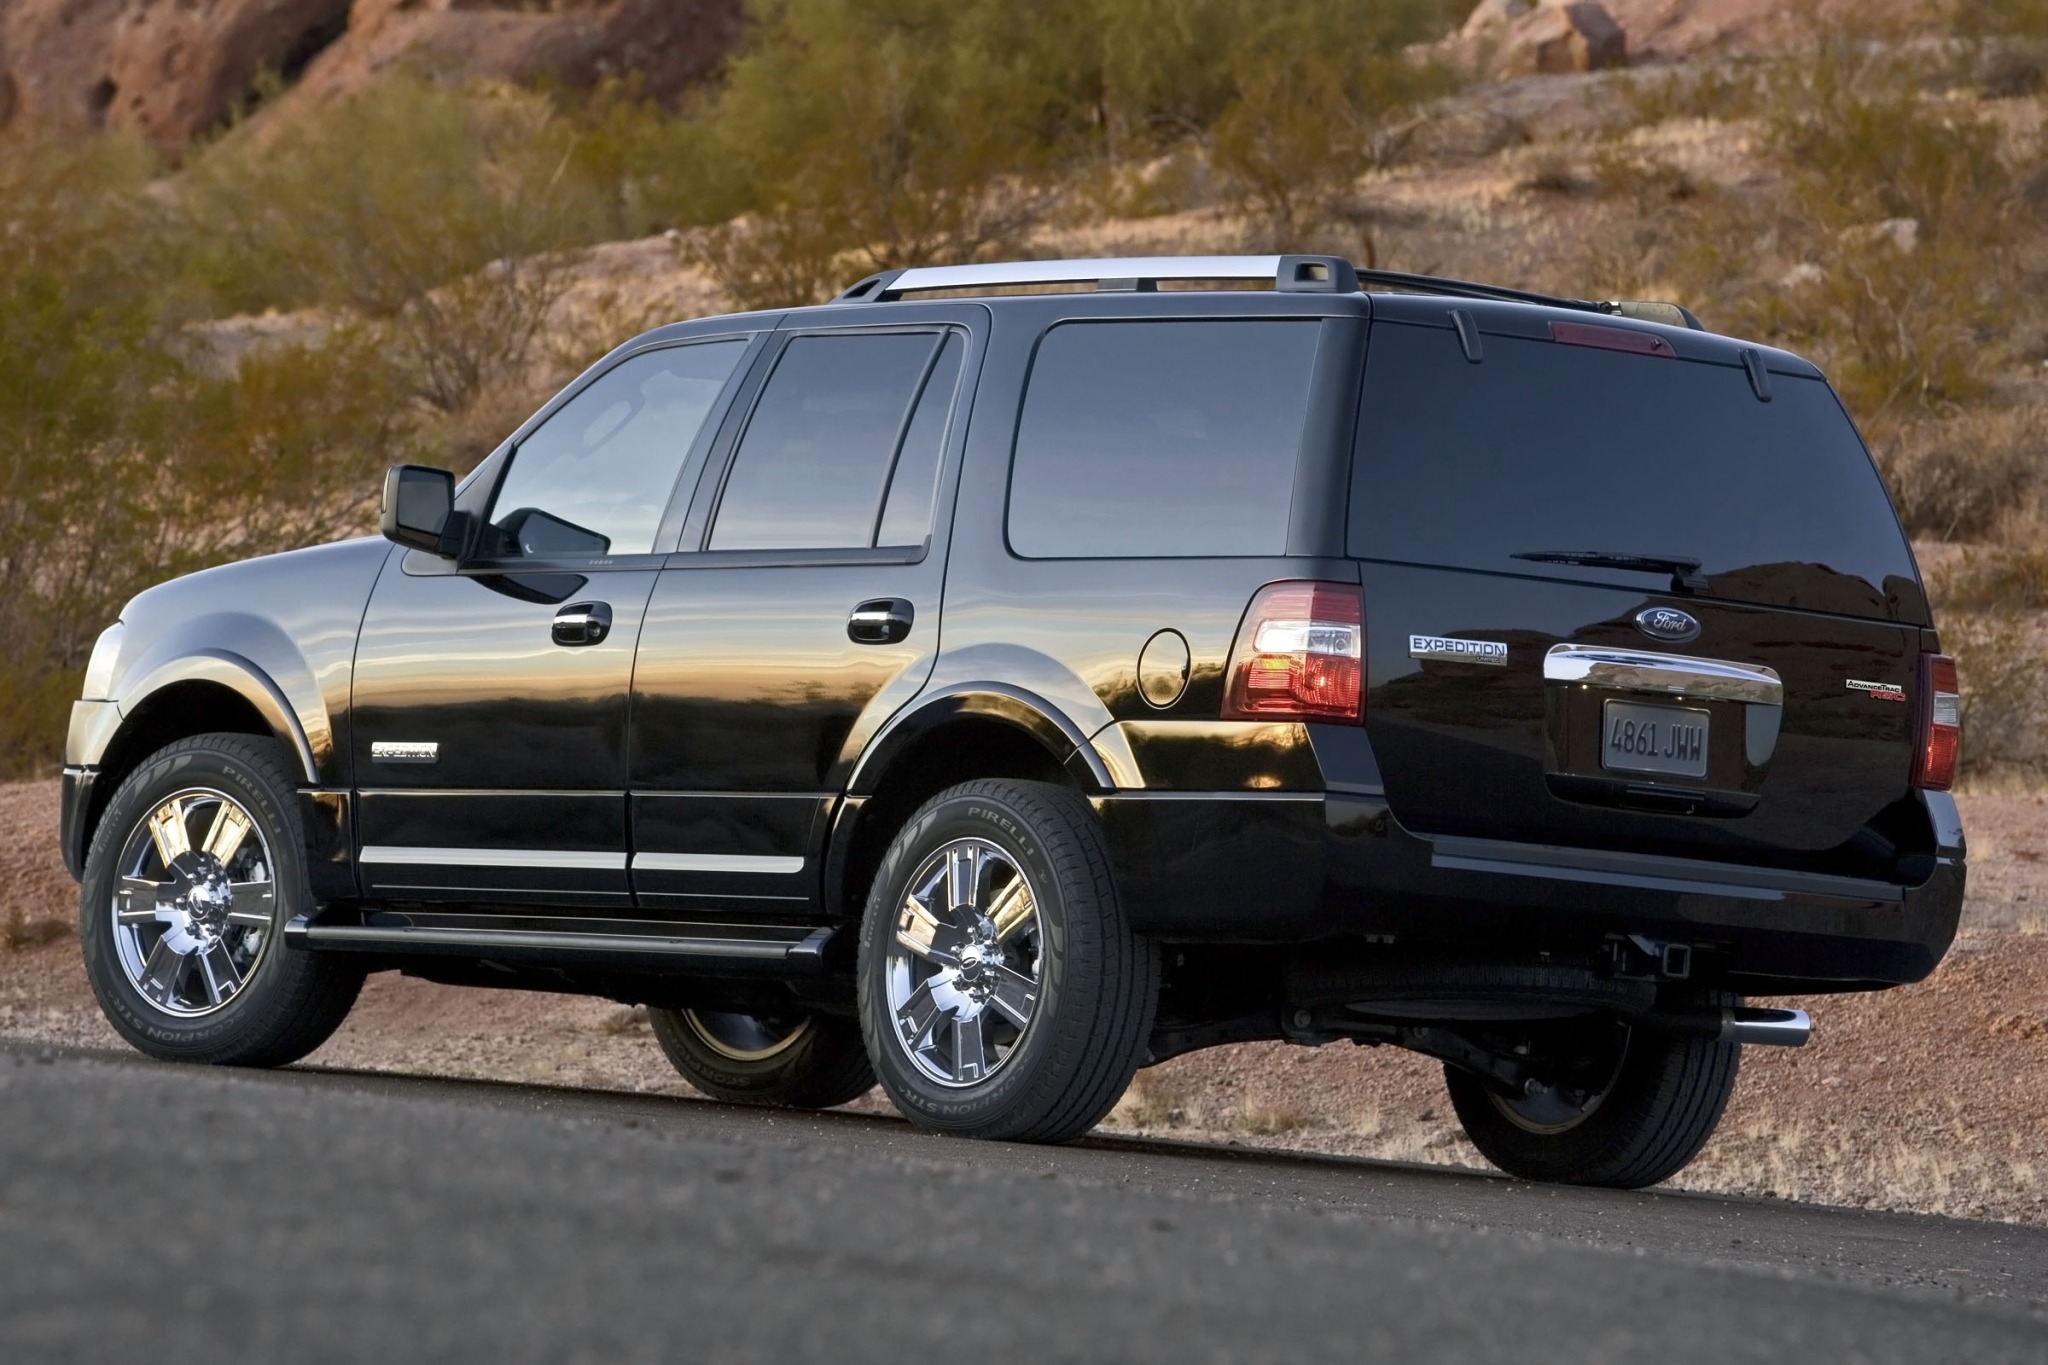 2013 Ford Expedition Limited 4dr SUV Exterior